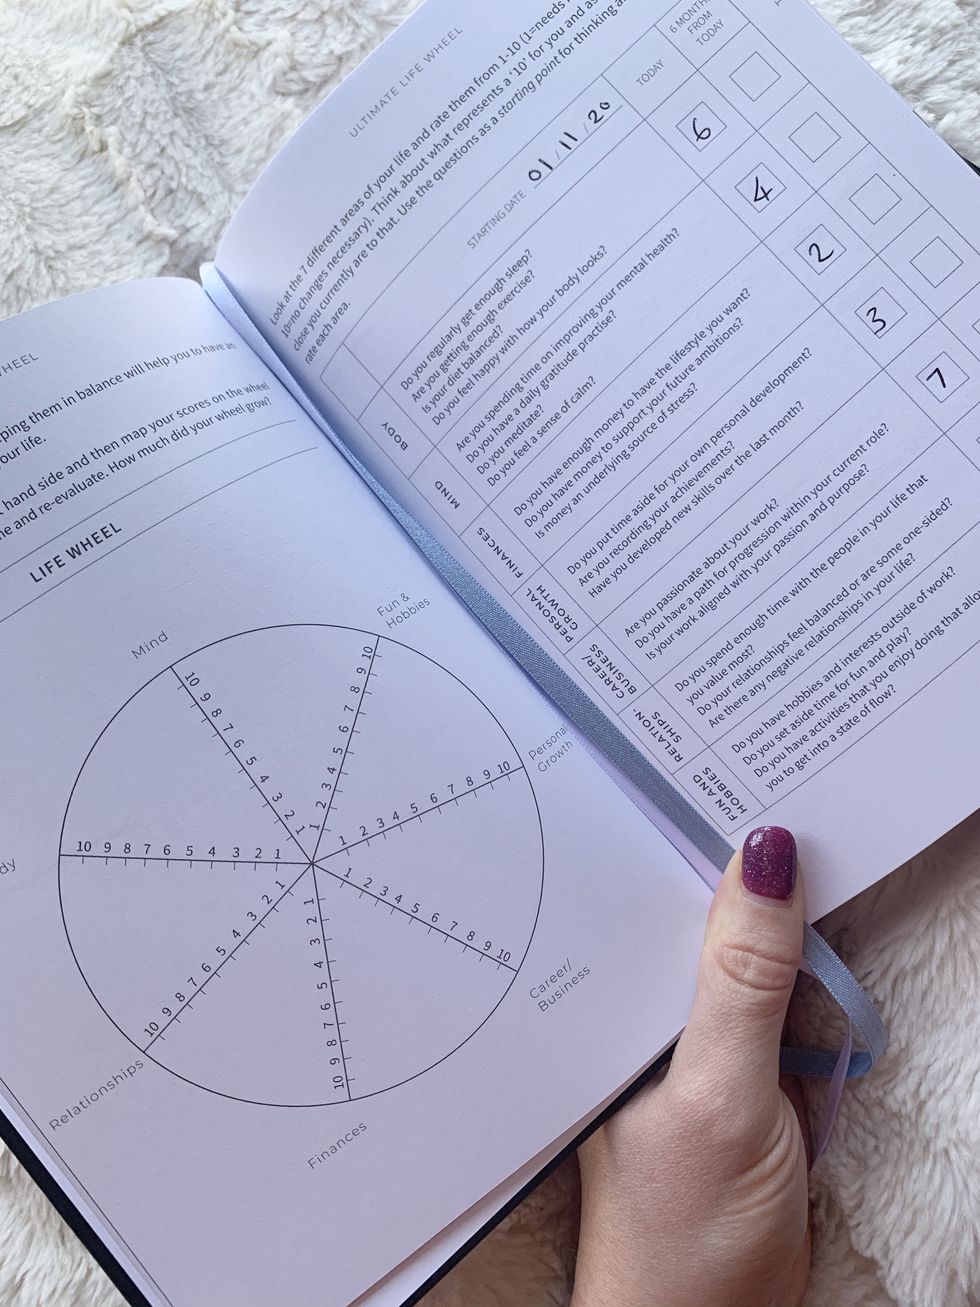 i used a goal planner to train myself to be more productive – and this is what happened